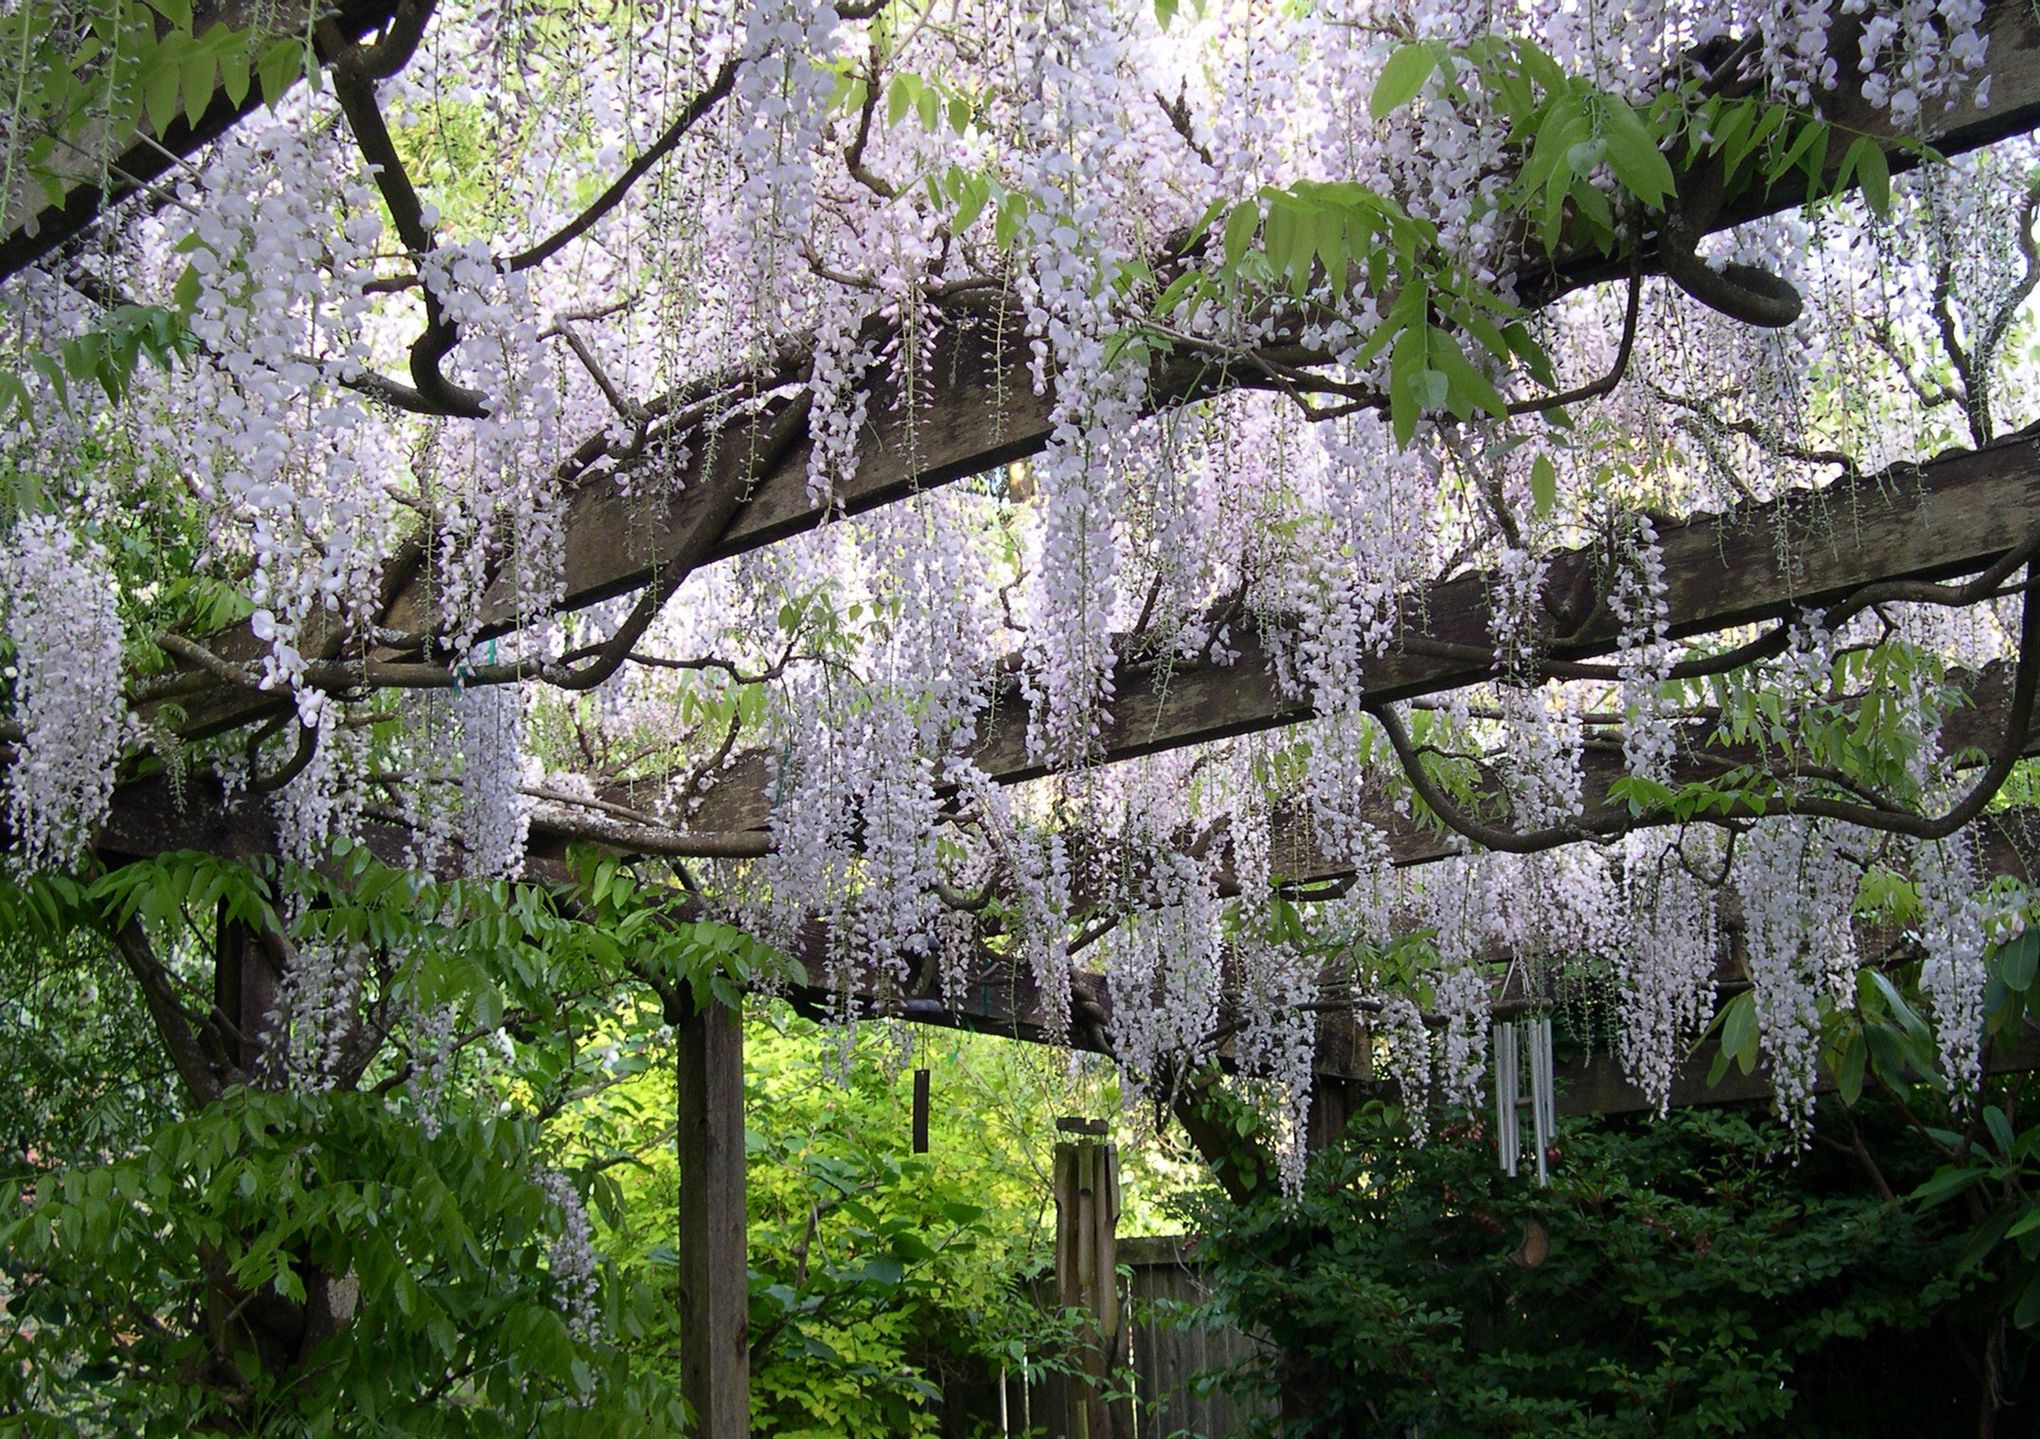 How to grow wisteria: where to plant this flowering climber